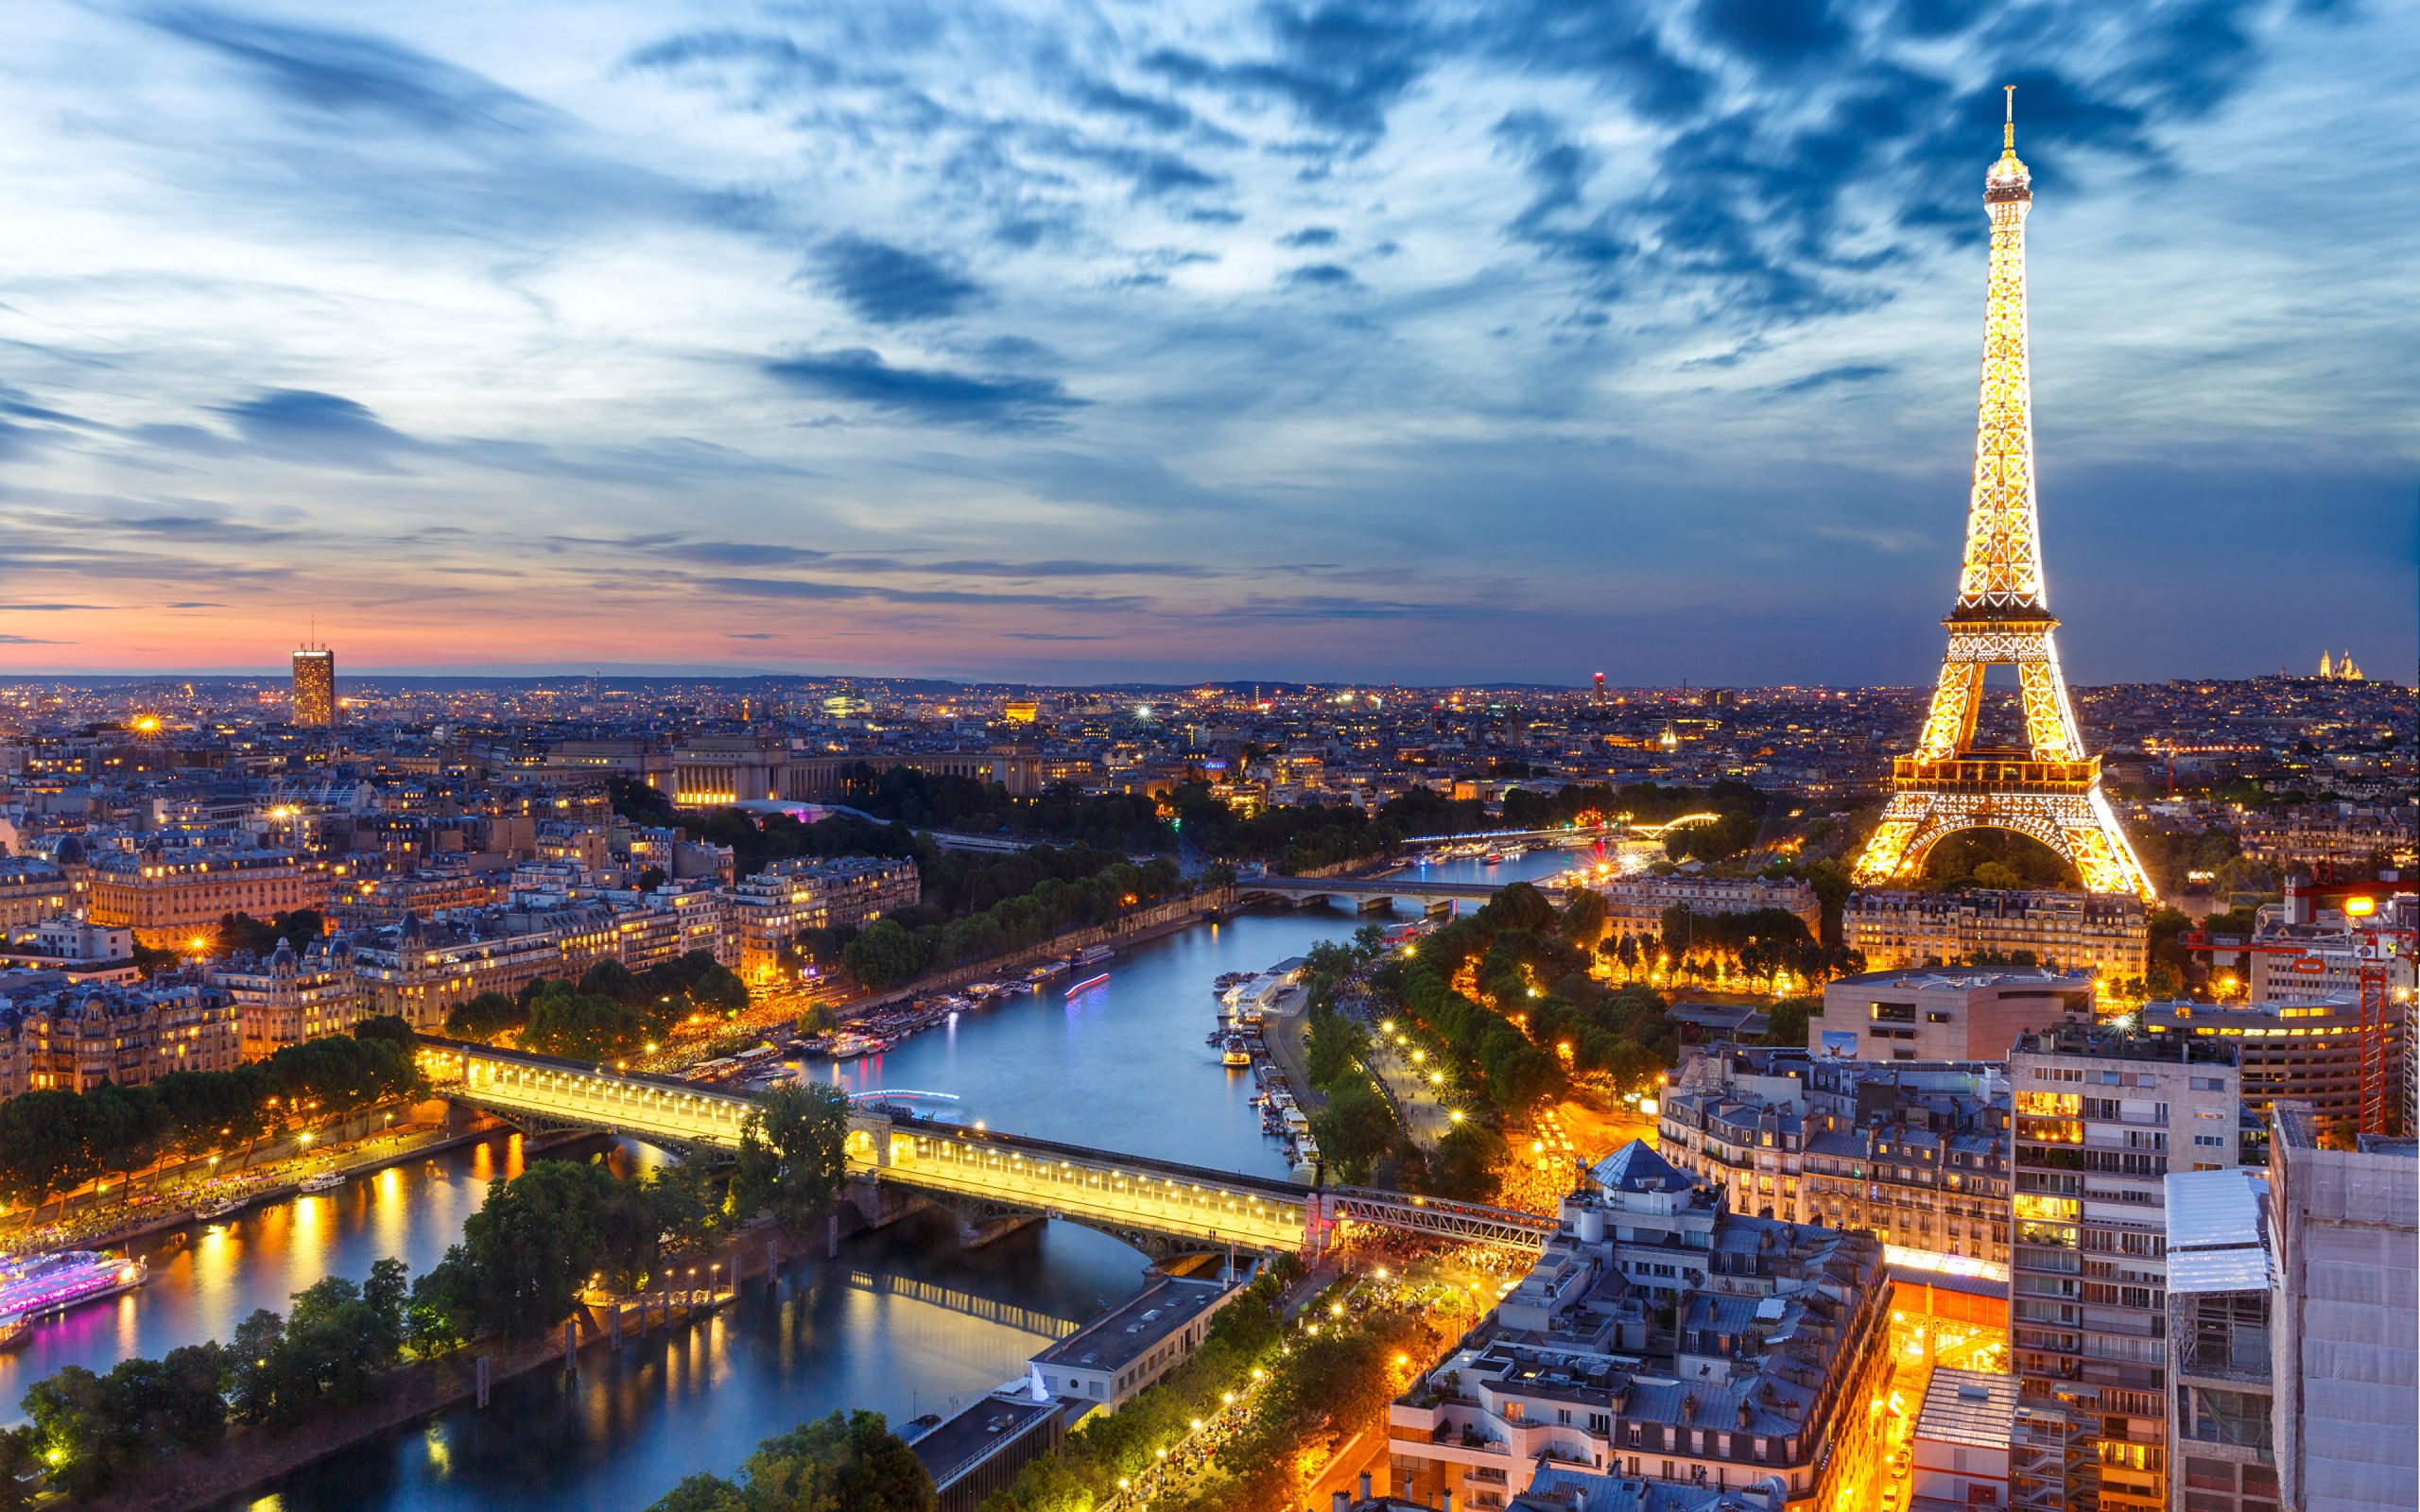 Sky_Evening_France_Eiffel_Tower_Paris_From_above_520603_3840x2400-scaled